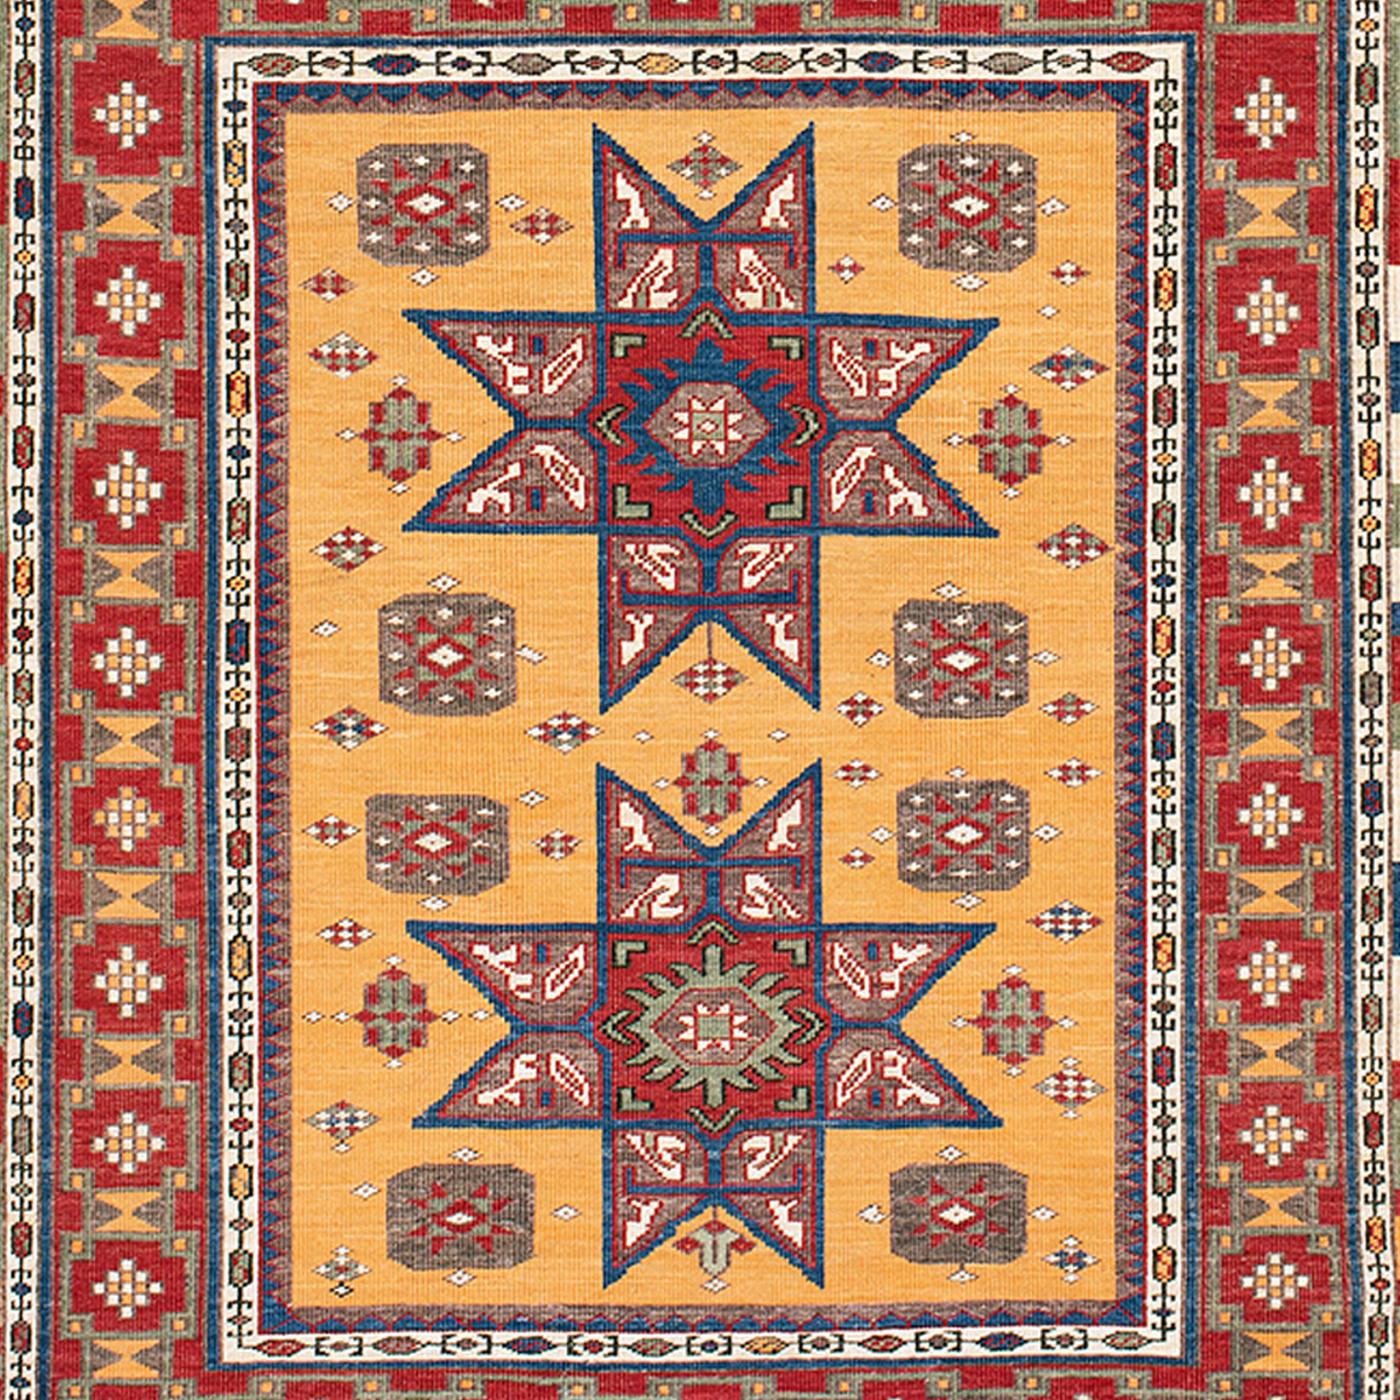 Hand-Woven Star Kazak Original 16th Century Style Flatweave Rug by Knots Rugs For Sale